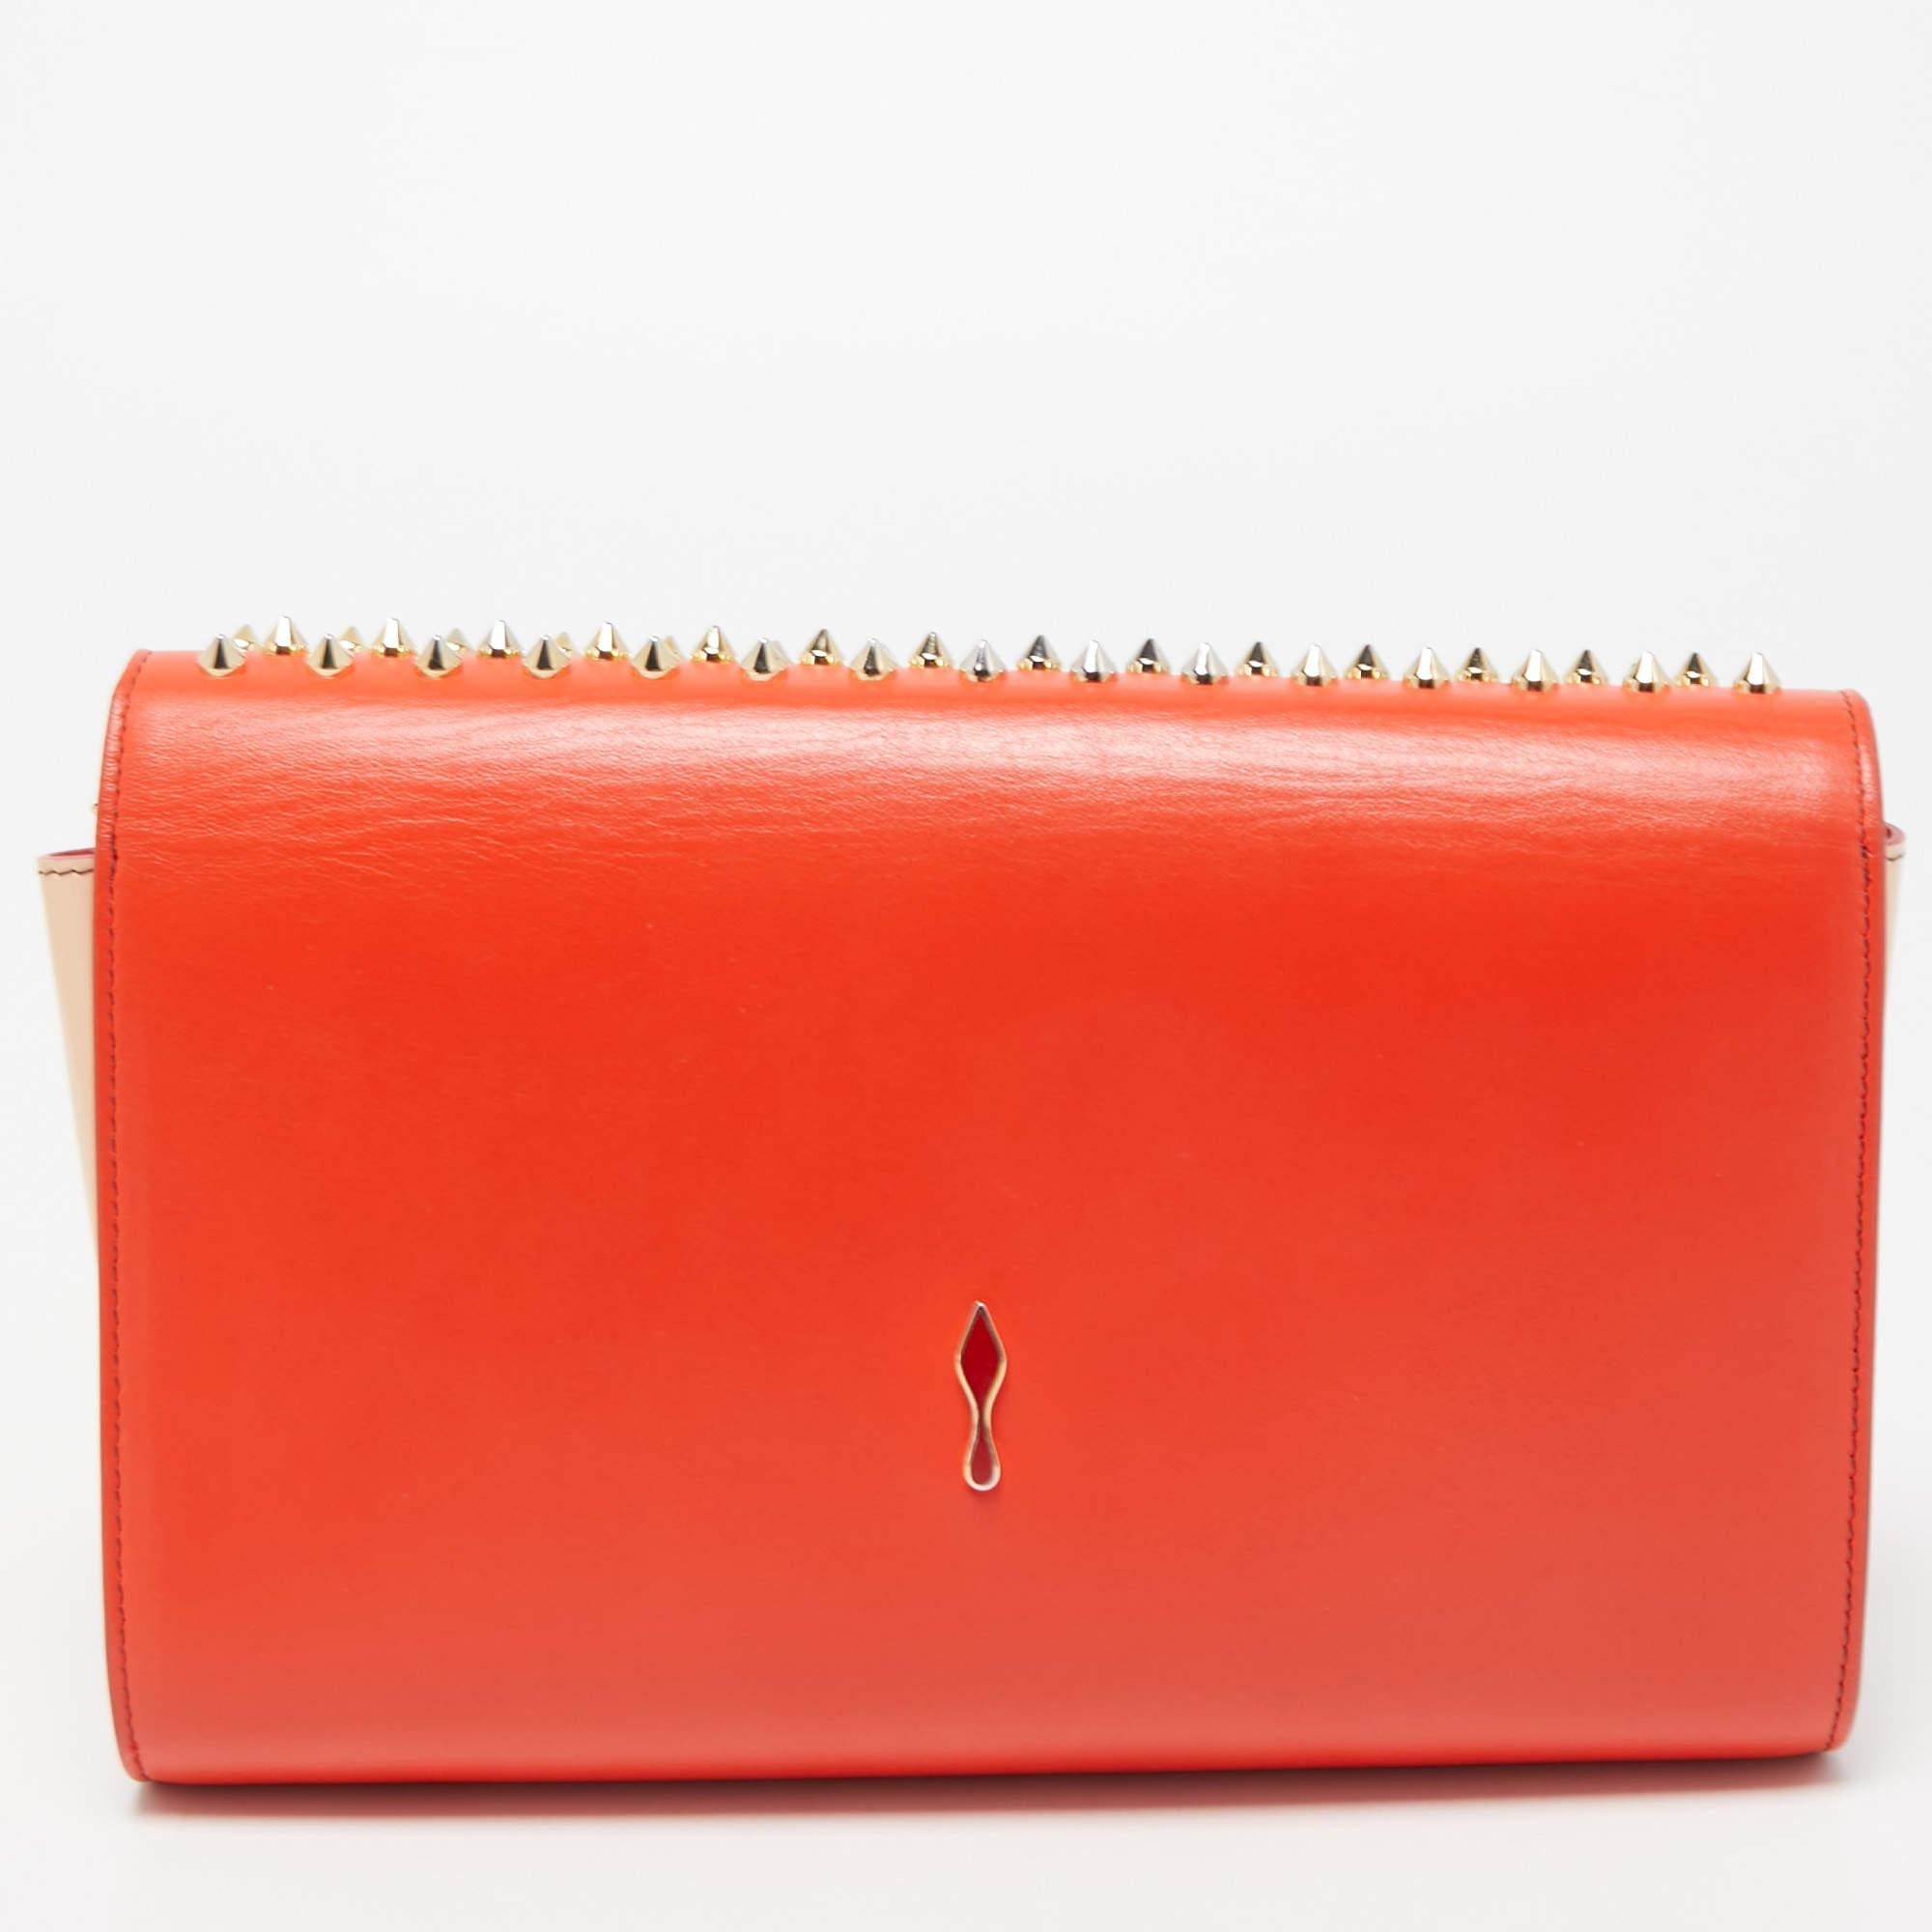 Whether going out for drinks or a casual outing, Christian Louboutin's Paloma clutch is the perfect way to add a little drama to your look. It comes crafted in leather with a flap top embellished with gold-tone spikes. The signature red interior is